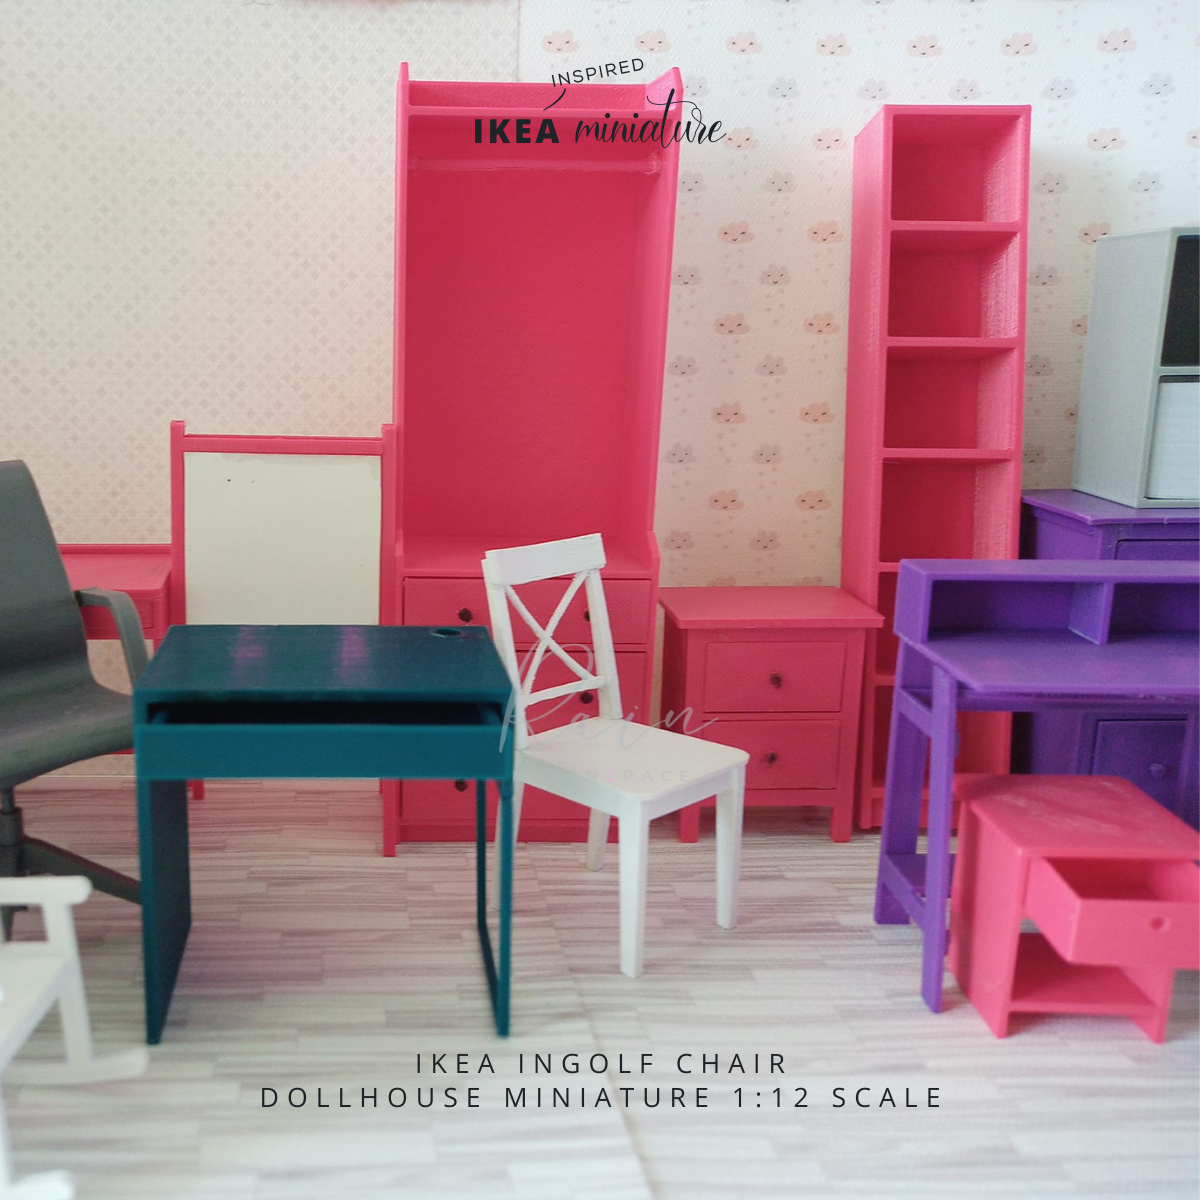 BeeEA IN GOOLE CATR DOLLHOUSE MINIATURE 1:12 SCALE STL file 1:12 Miniature model of IKEA-INSPIRED Ingolf Chair for 1:12 Dollhouse・Design to download and 3D print, RAIN